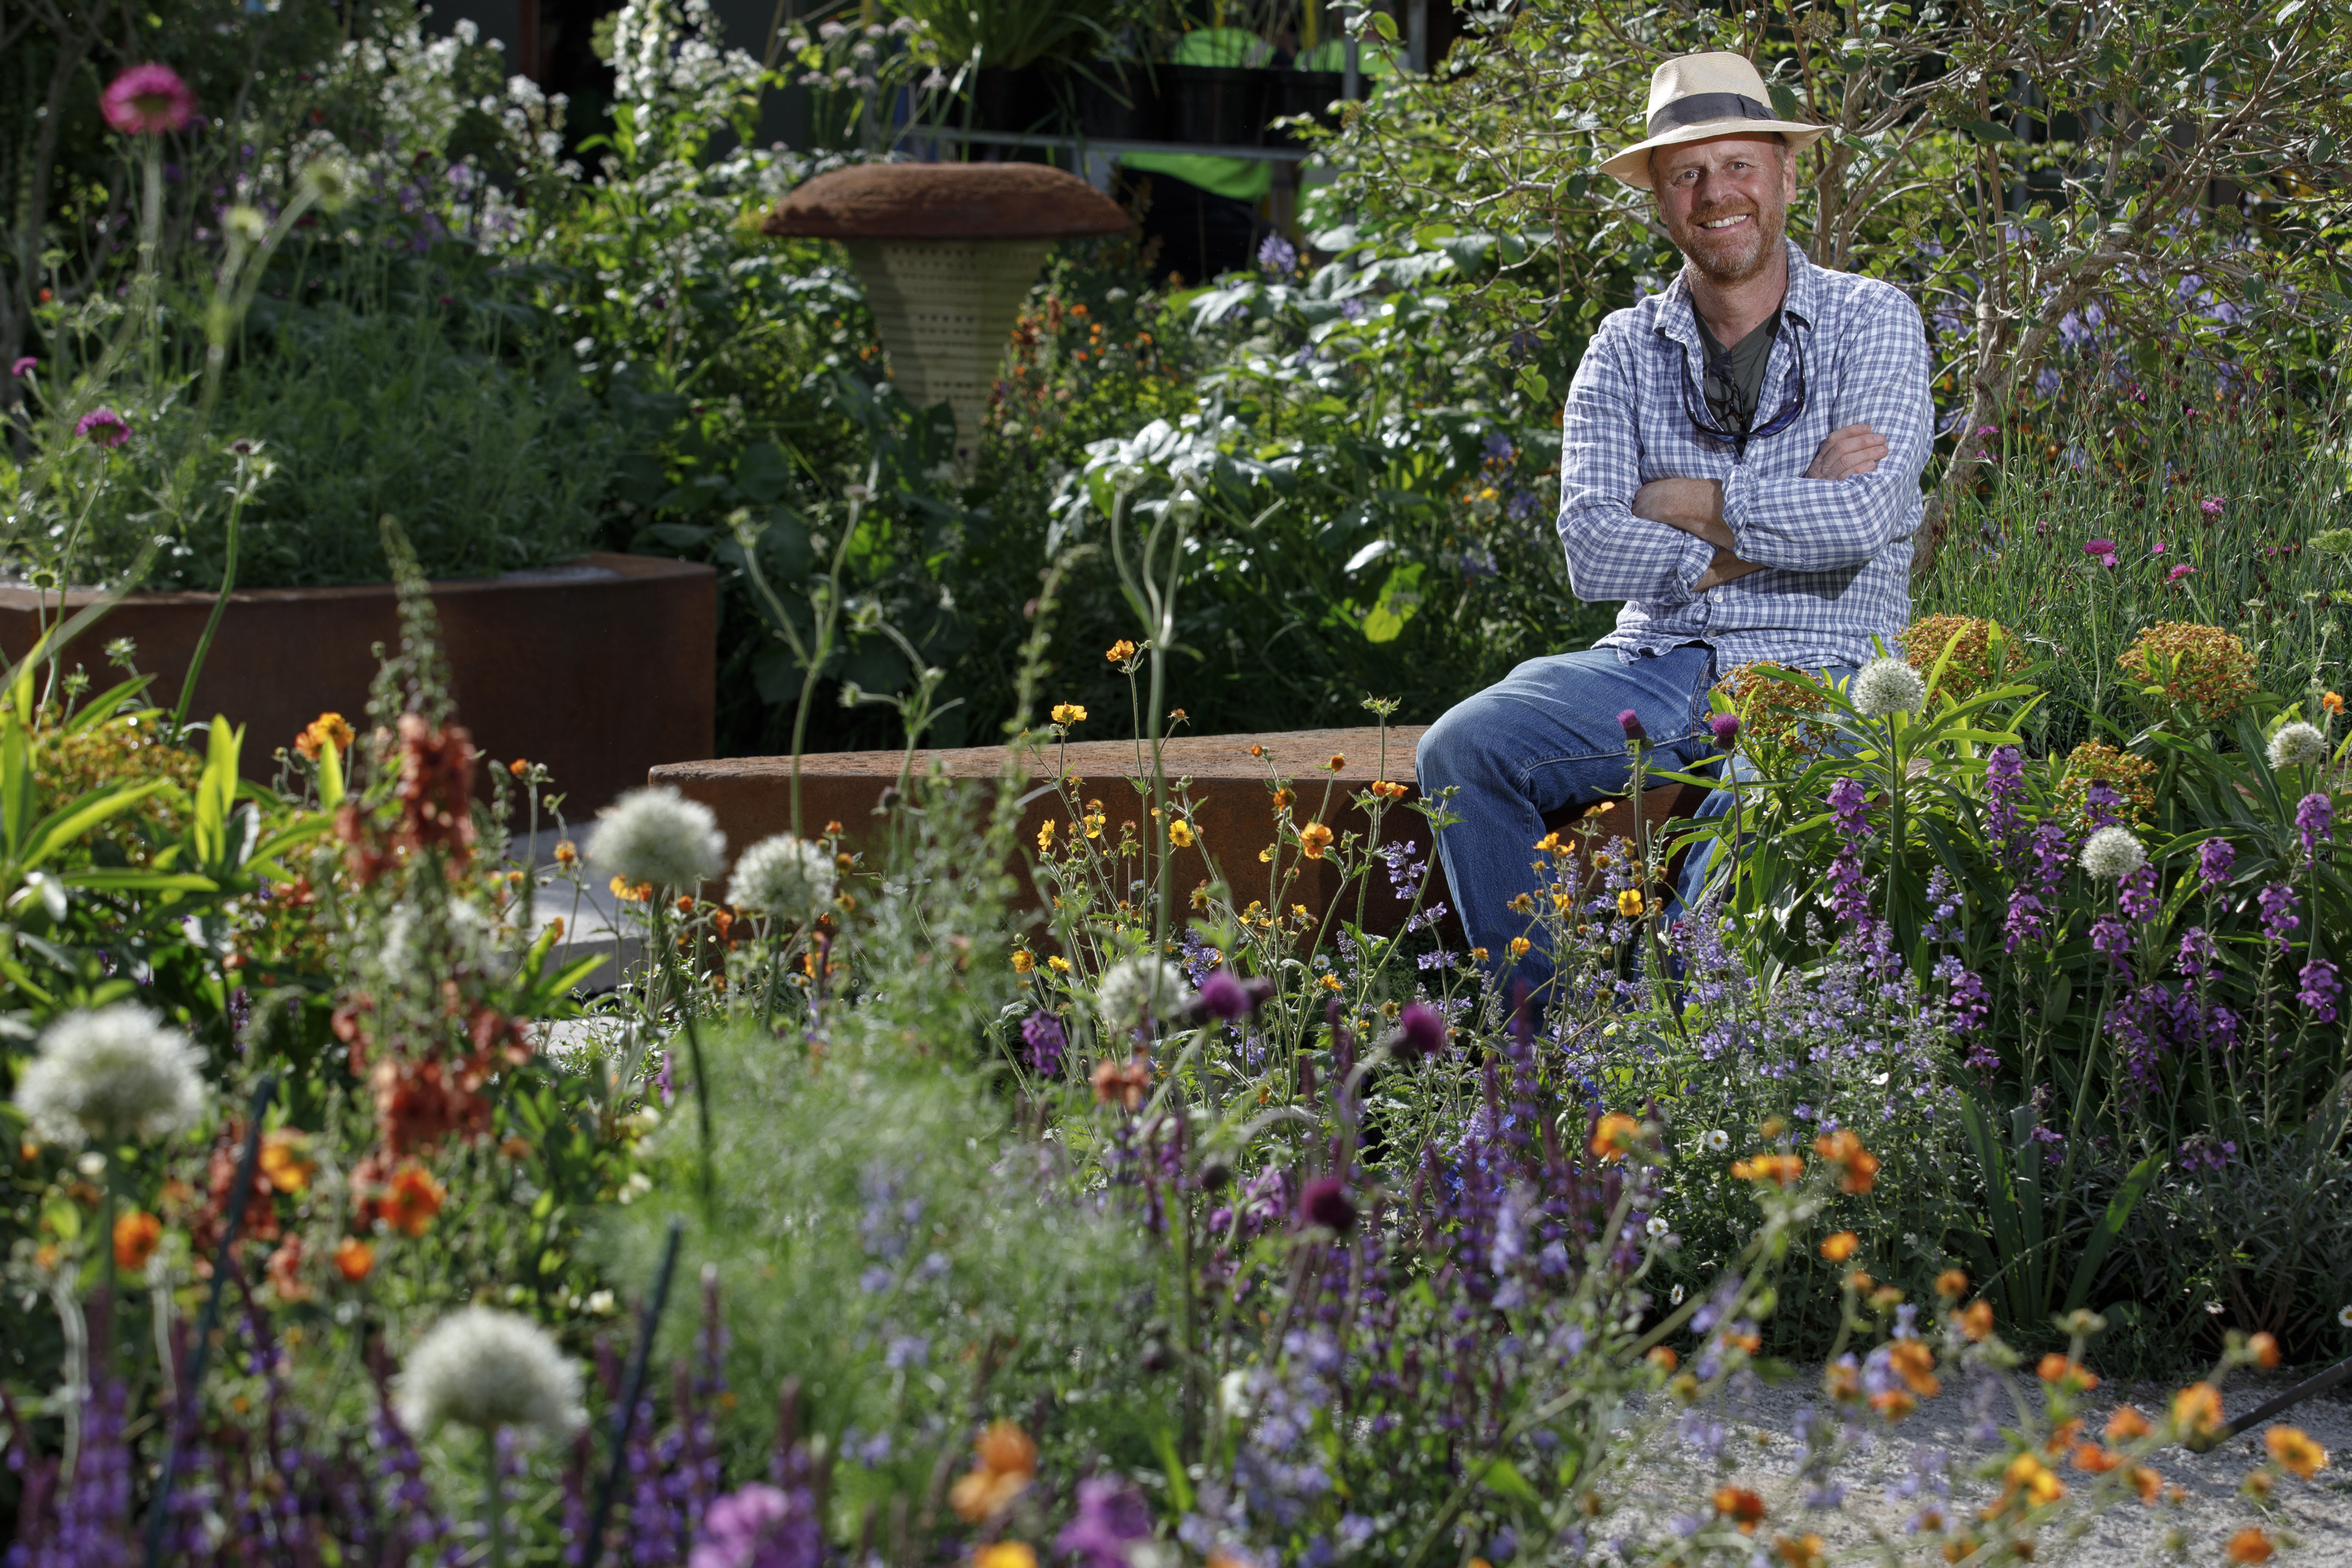 Garden designer Joe Swift in the BBC Studios Our Green Planet and RHS Bee Garden he designed, a space filled with plants for pollinators